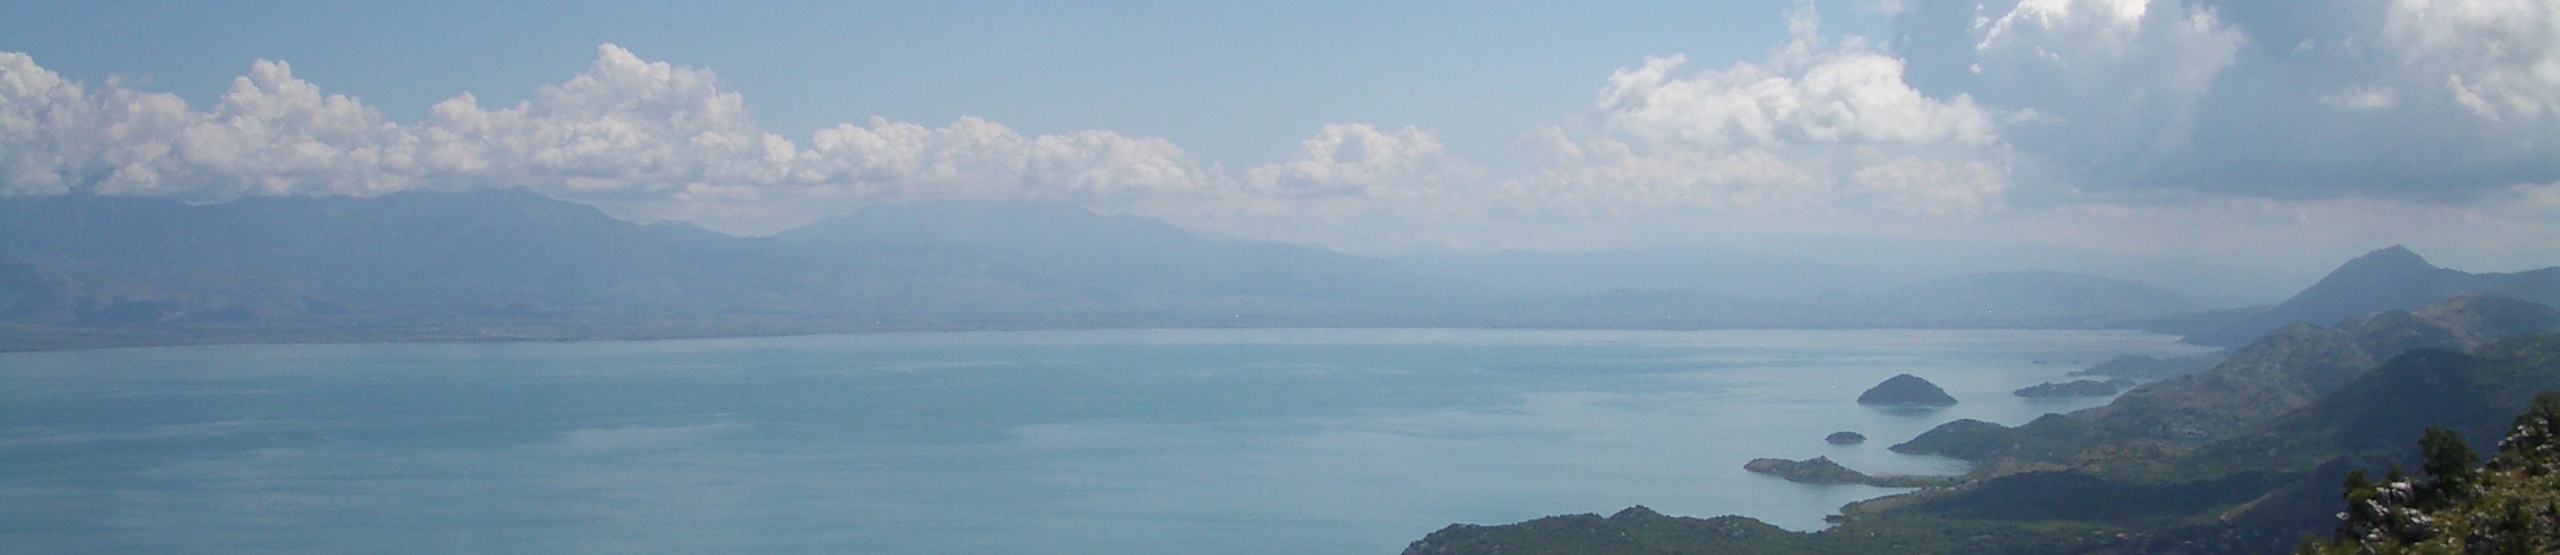 Skadar lake, the largest lake in the Balkans and a famous beauty spot